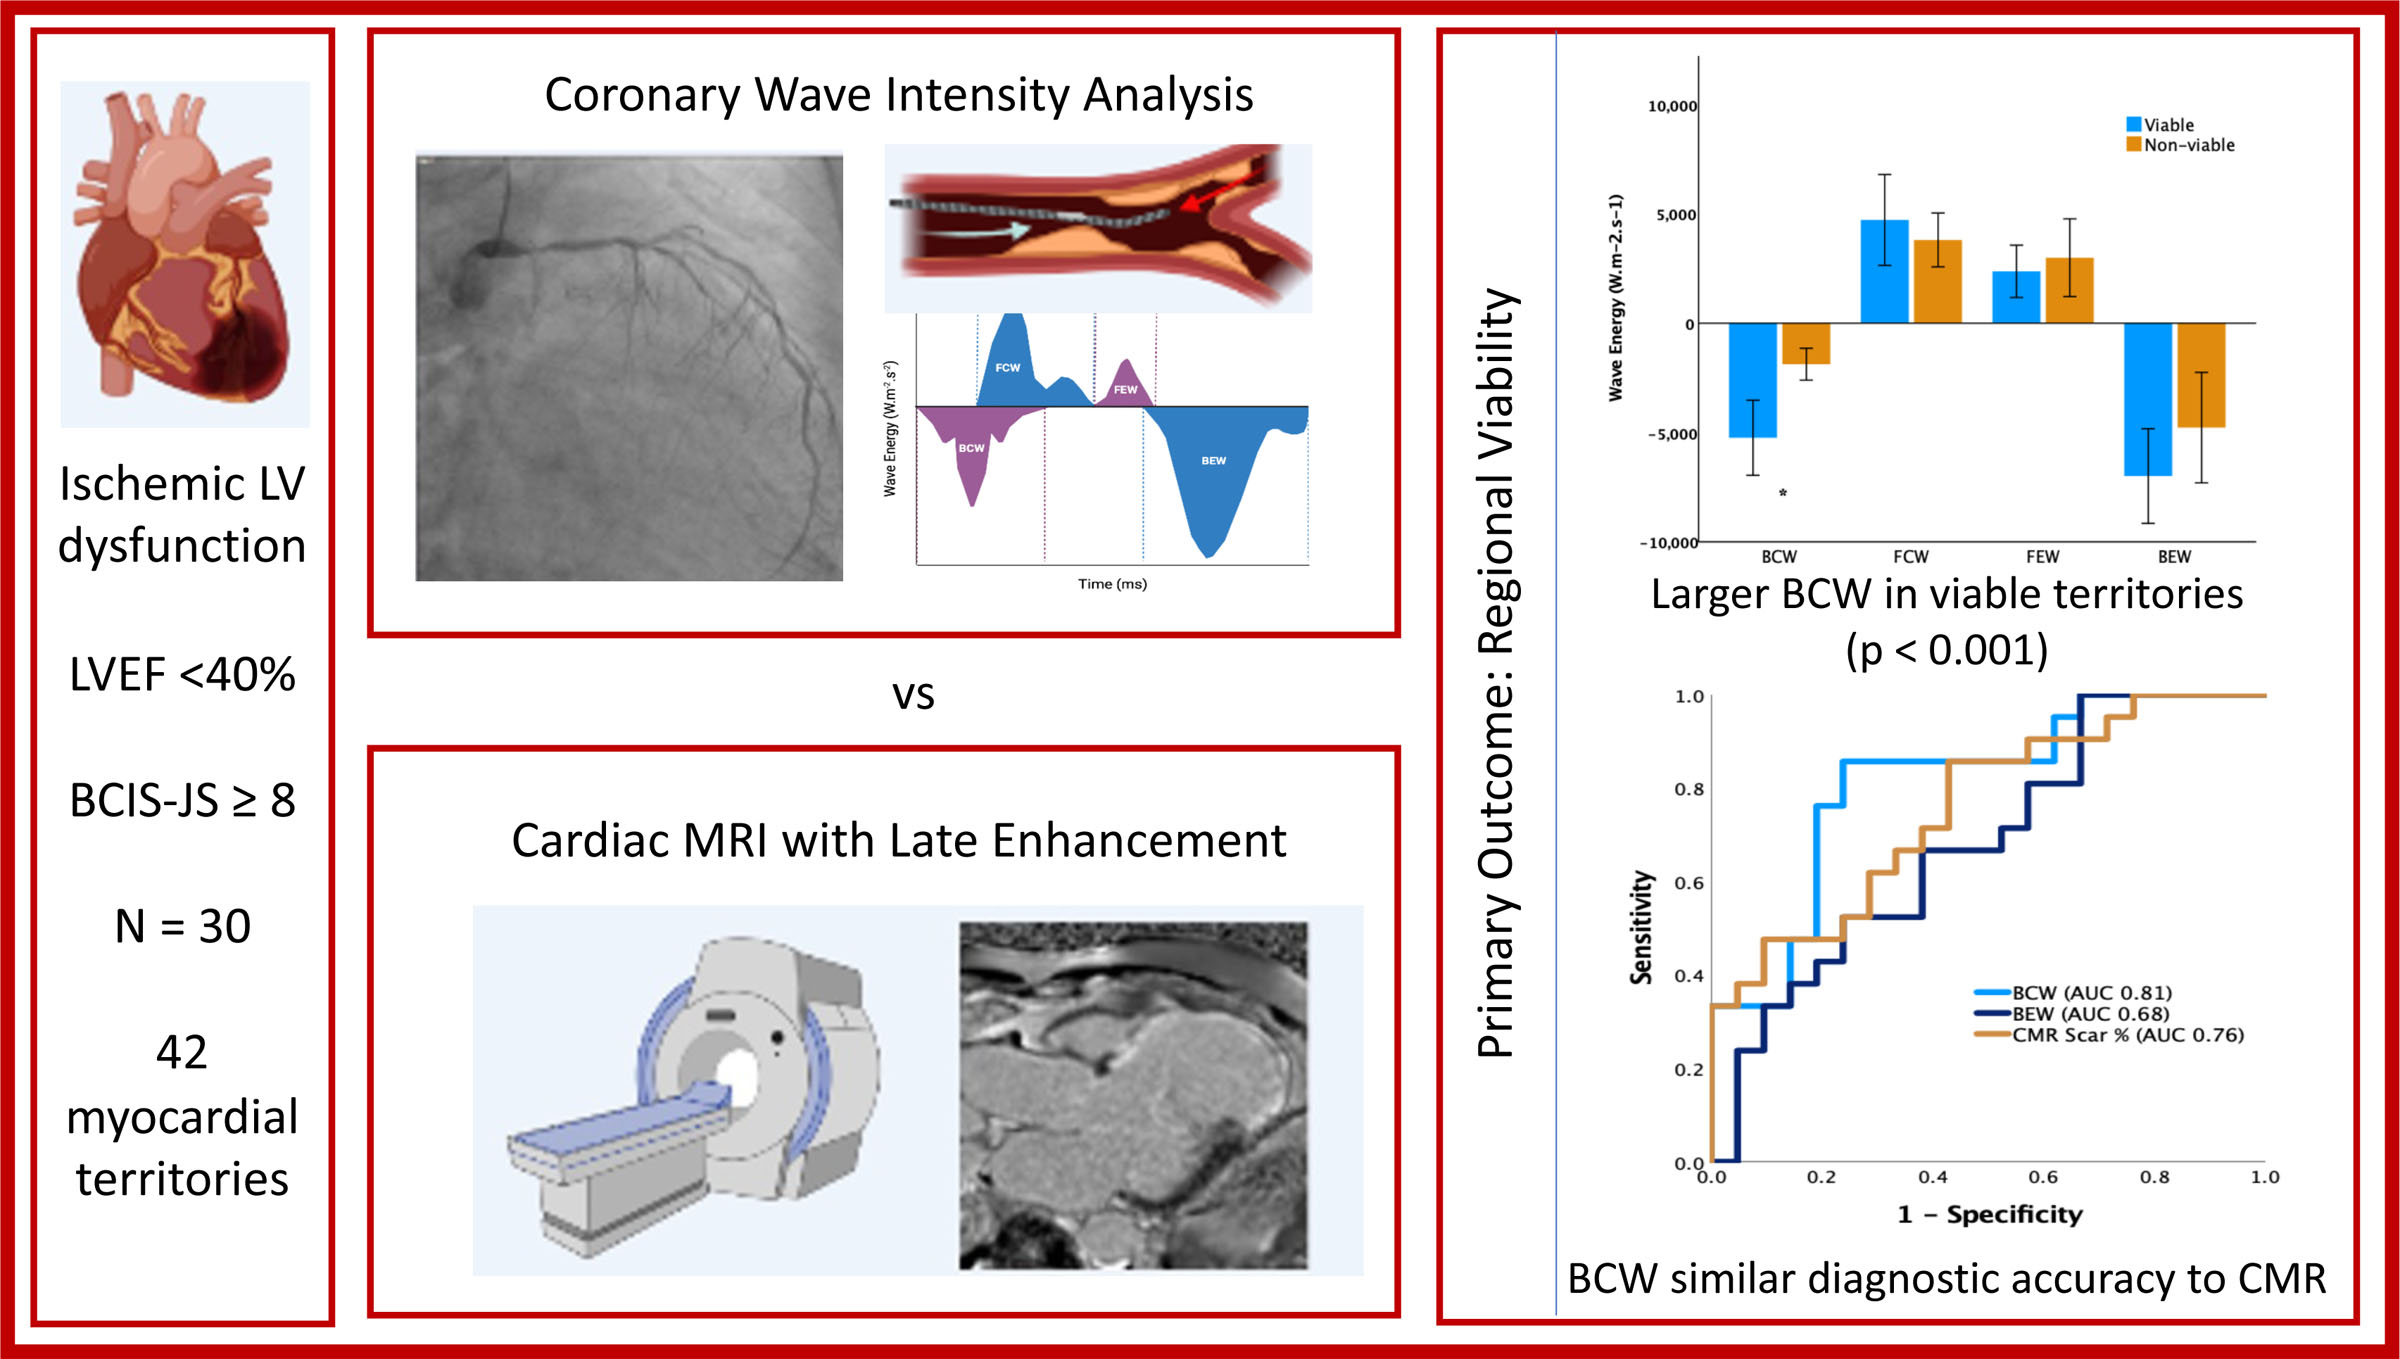 Coronary Wave Intensity Analysis as an Invasive and Vessel-Specific Index of Myocardial Viability